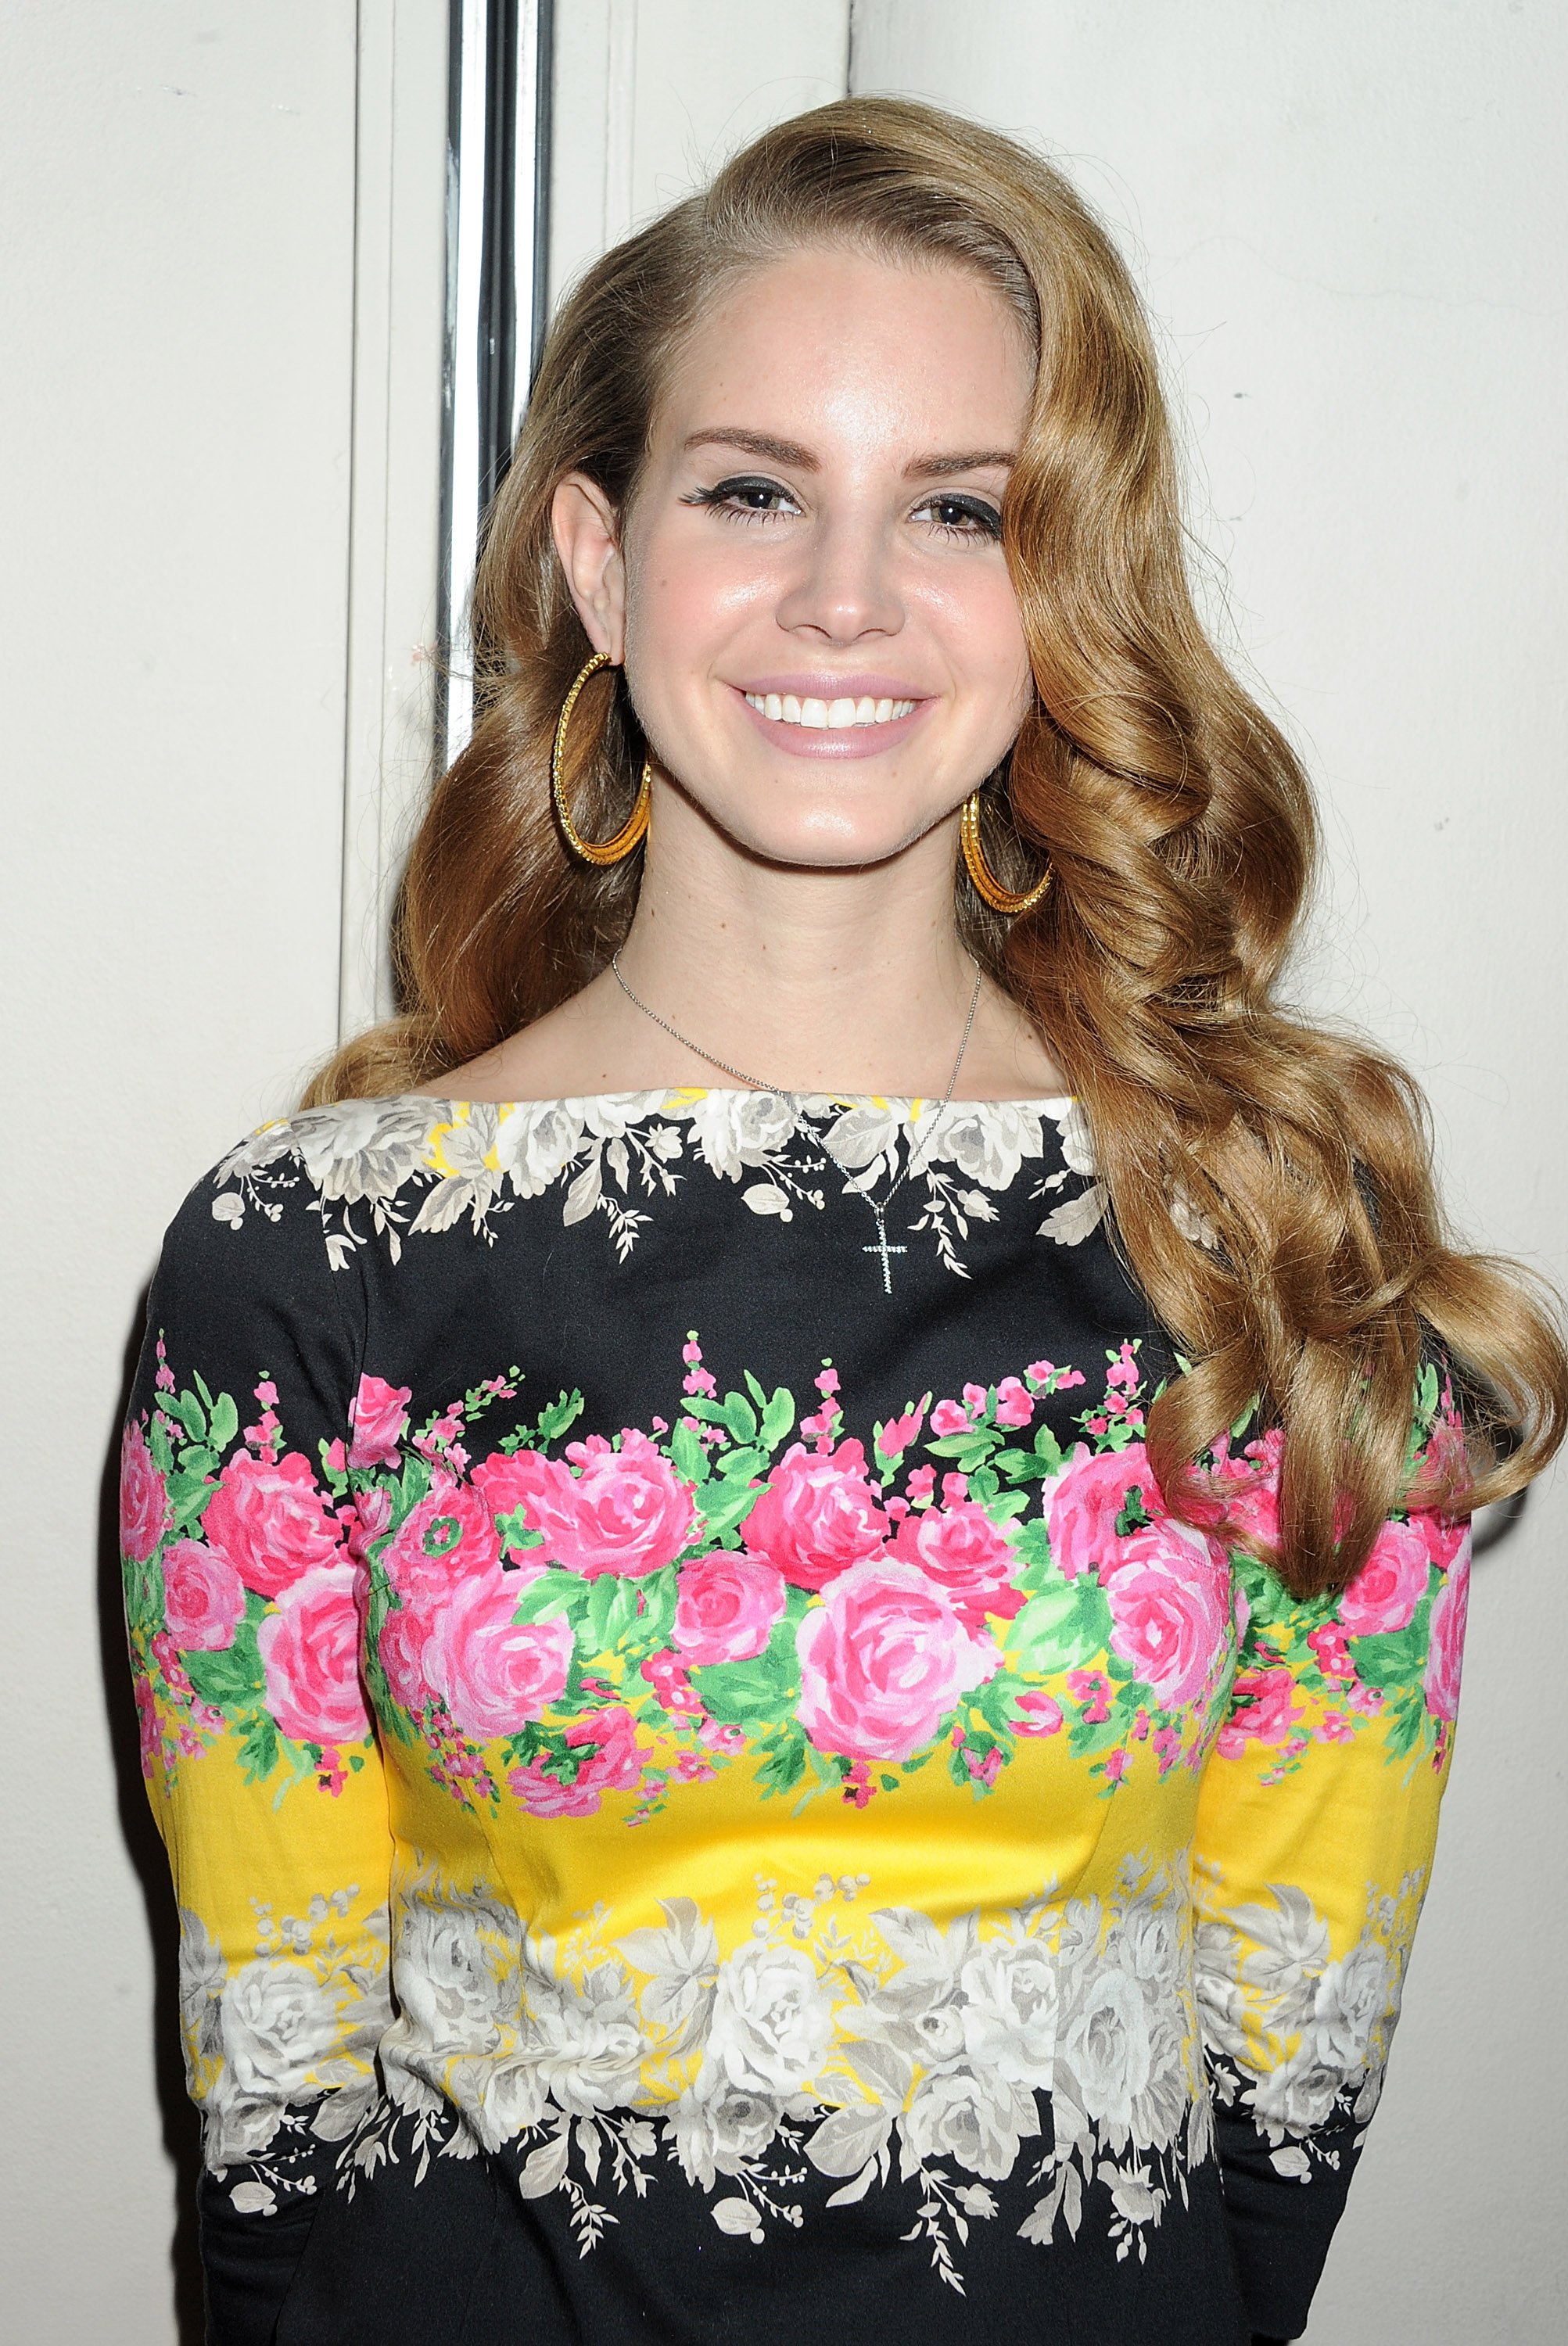 Lana Del Rey at the Q Awards 2011 on October 24, 2011 | Source: Getty Images